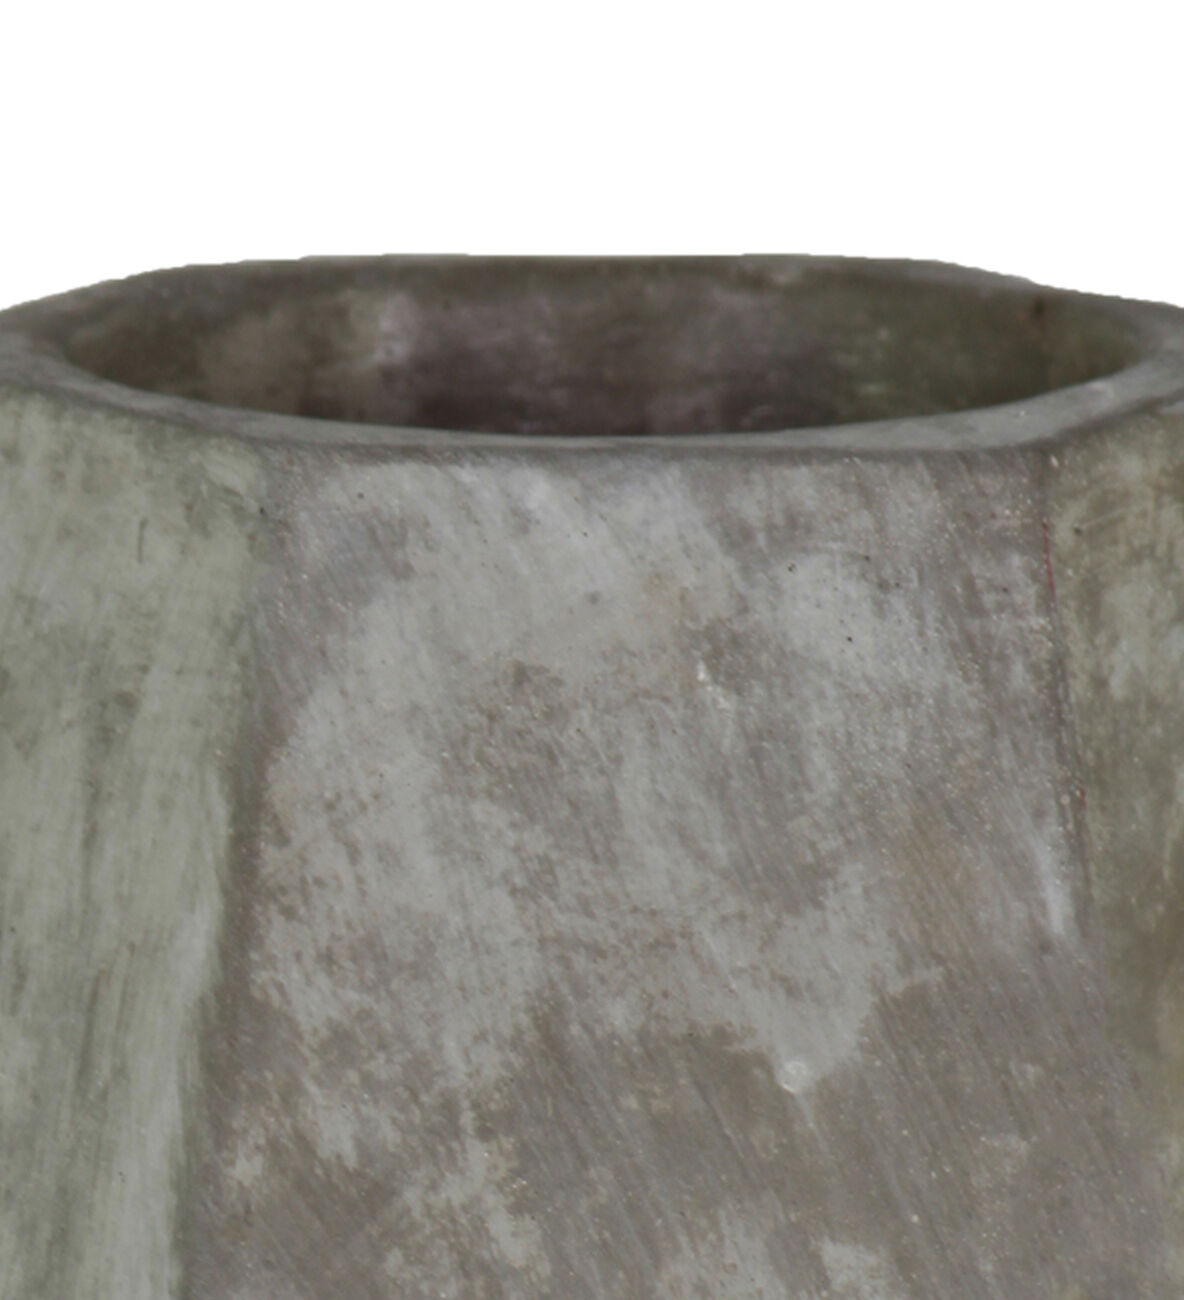 Cement Pot with Hexagonal Top and Bottom with Pentagonal Body, Large, Gray